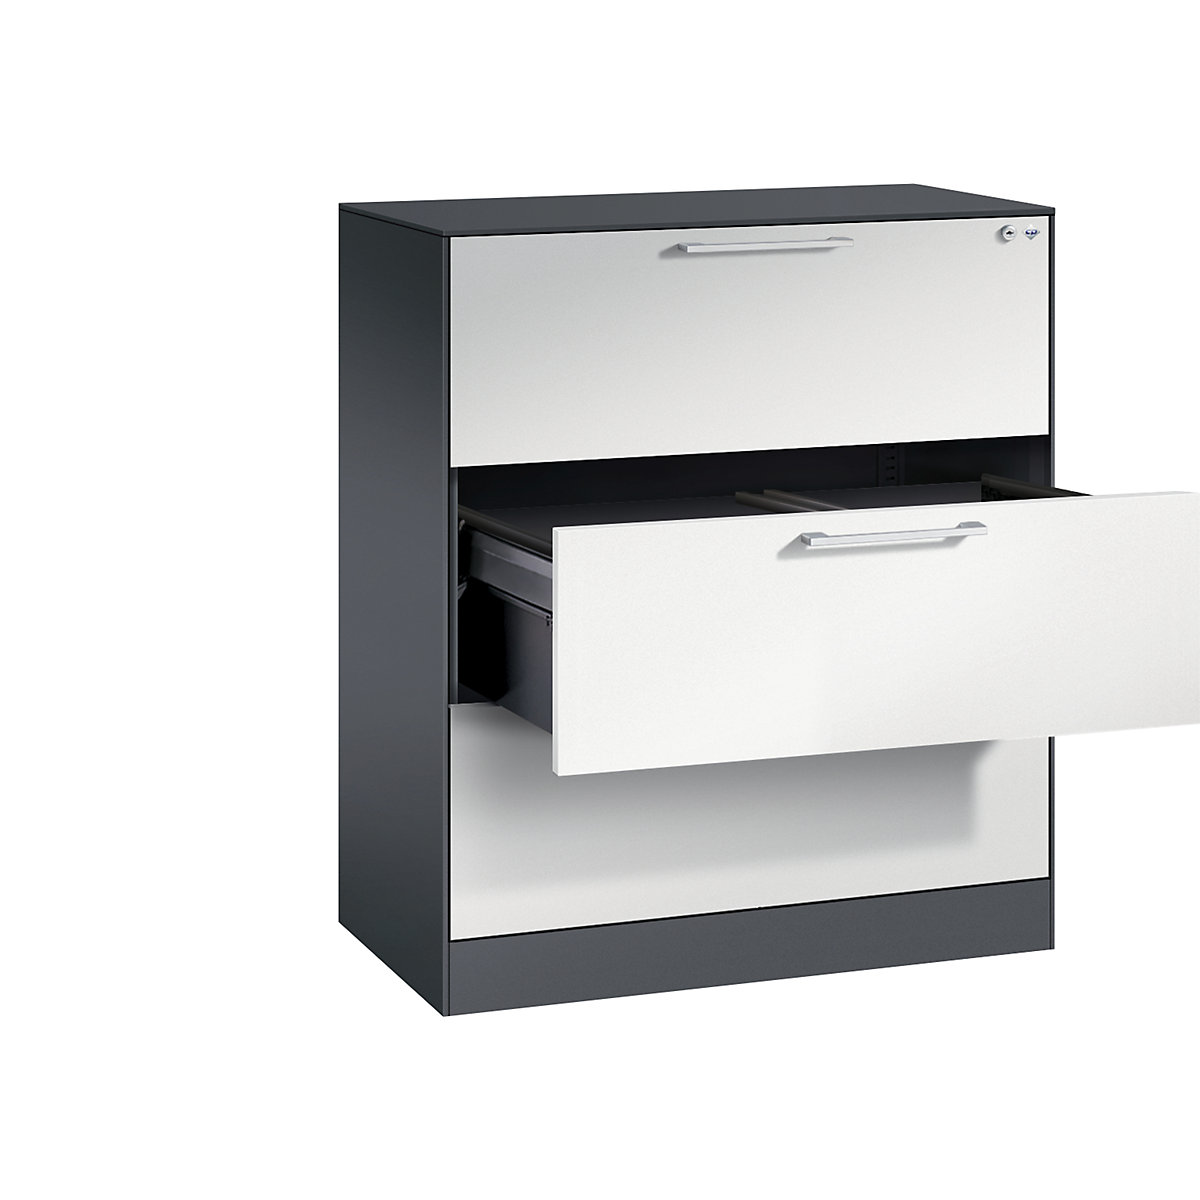 ASISTO suspension filing cabinet – C+P, width 800 mm, with 3 drawers, black grey/light grey-8